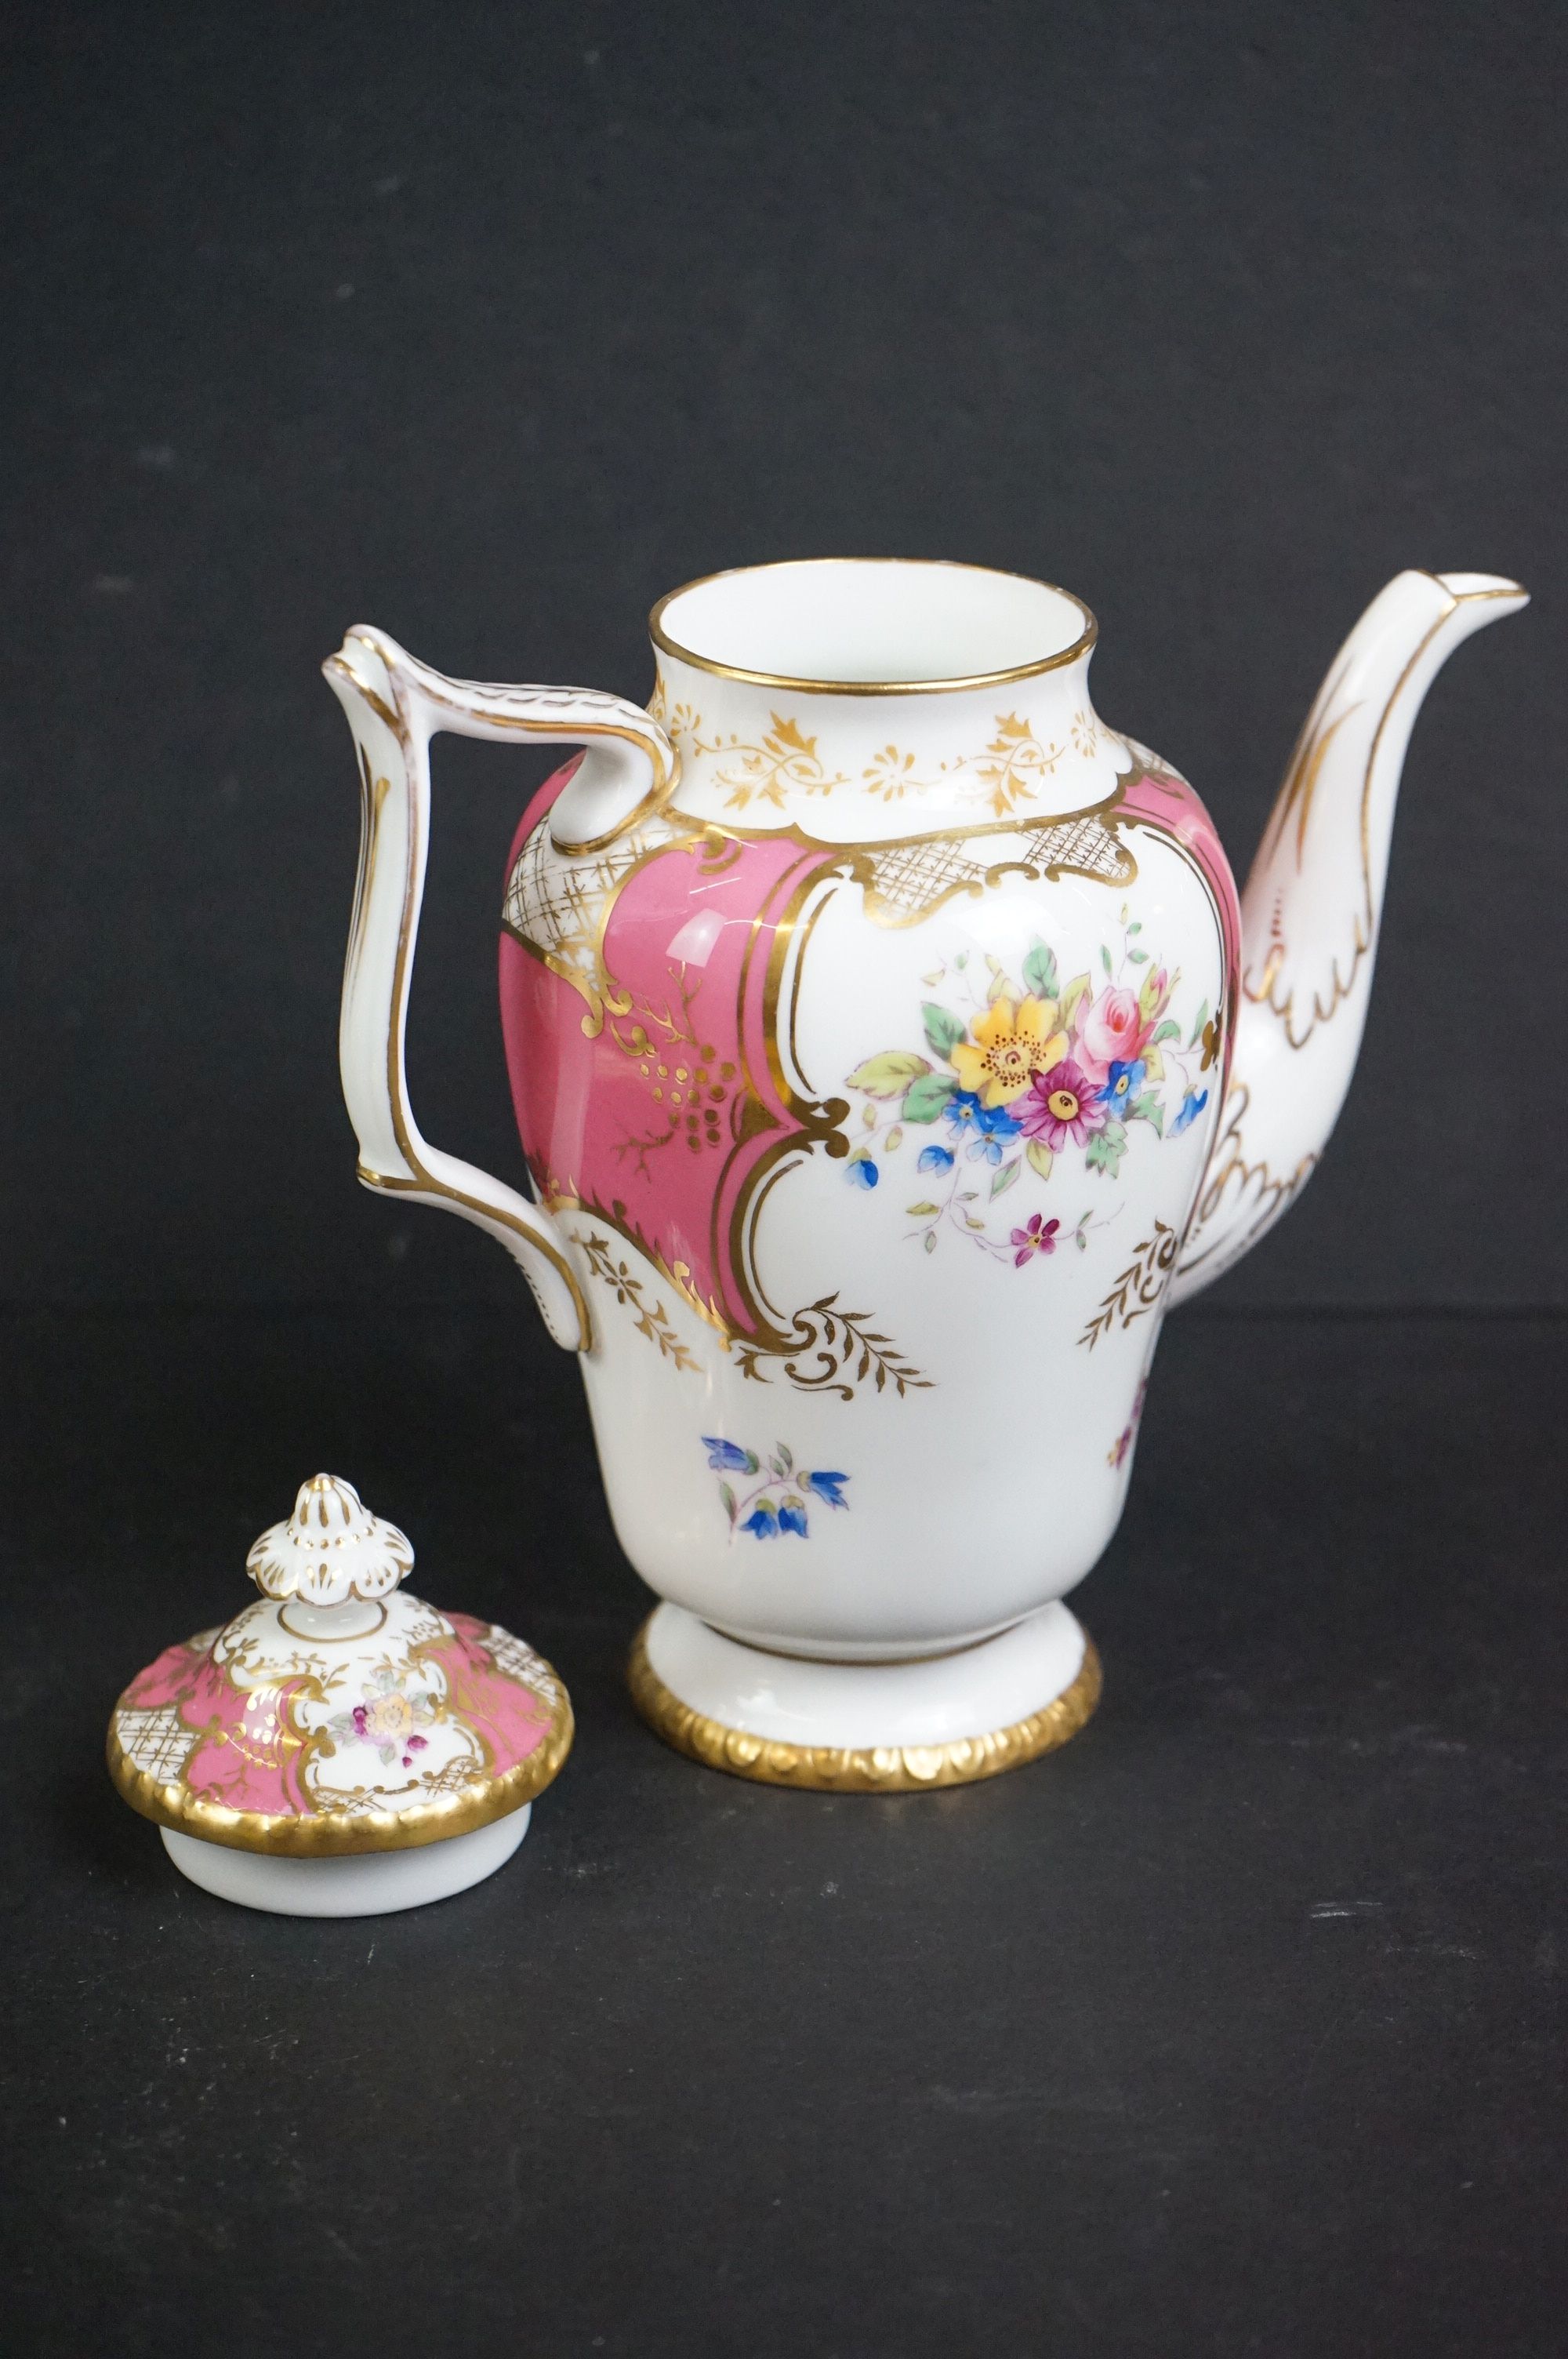 Early 20th century Coalport Cabinet part Coffee Set decorated in pink and gilt with floral sprays - Image 4 of 24